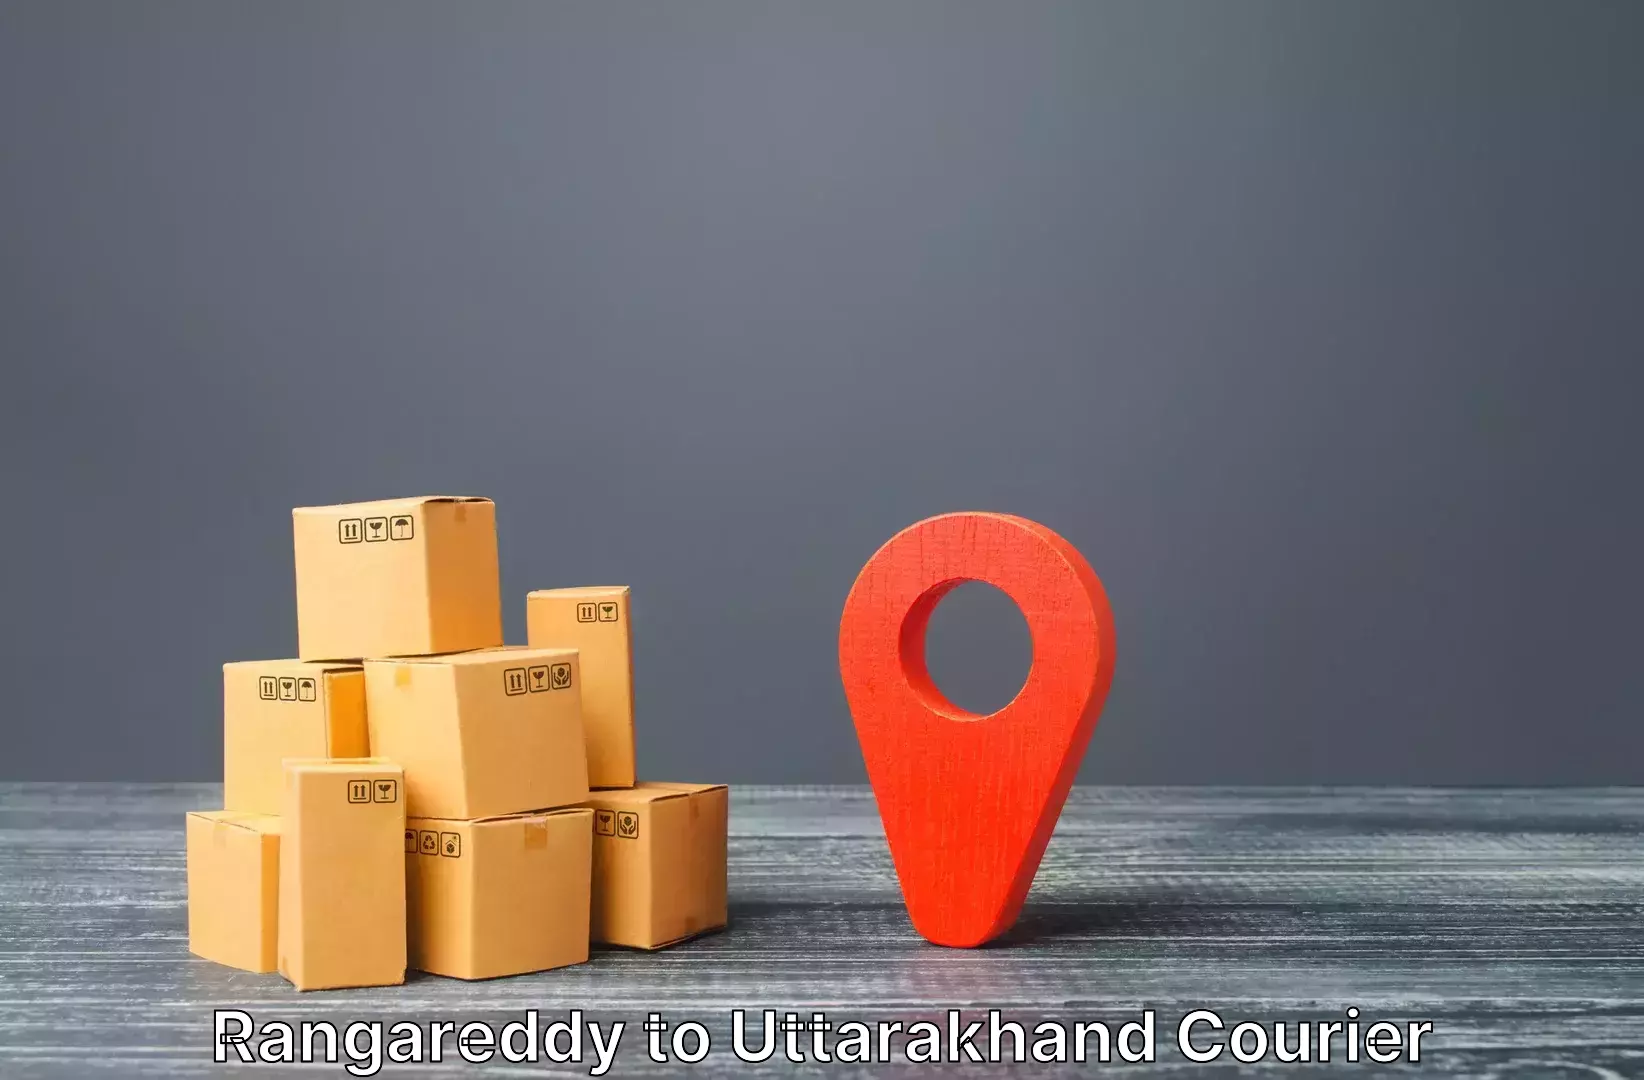 Online luggage shipping in Rangareddy to Rudrapur